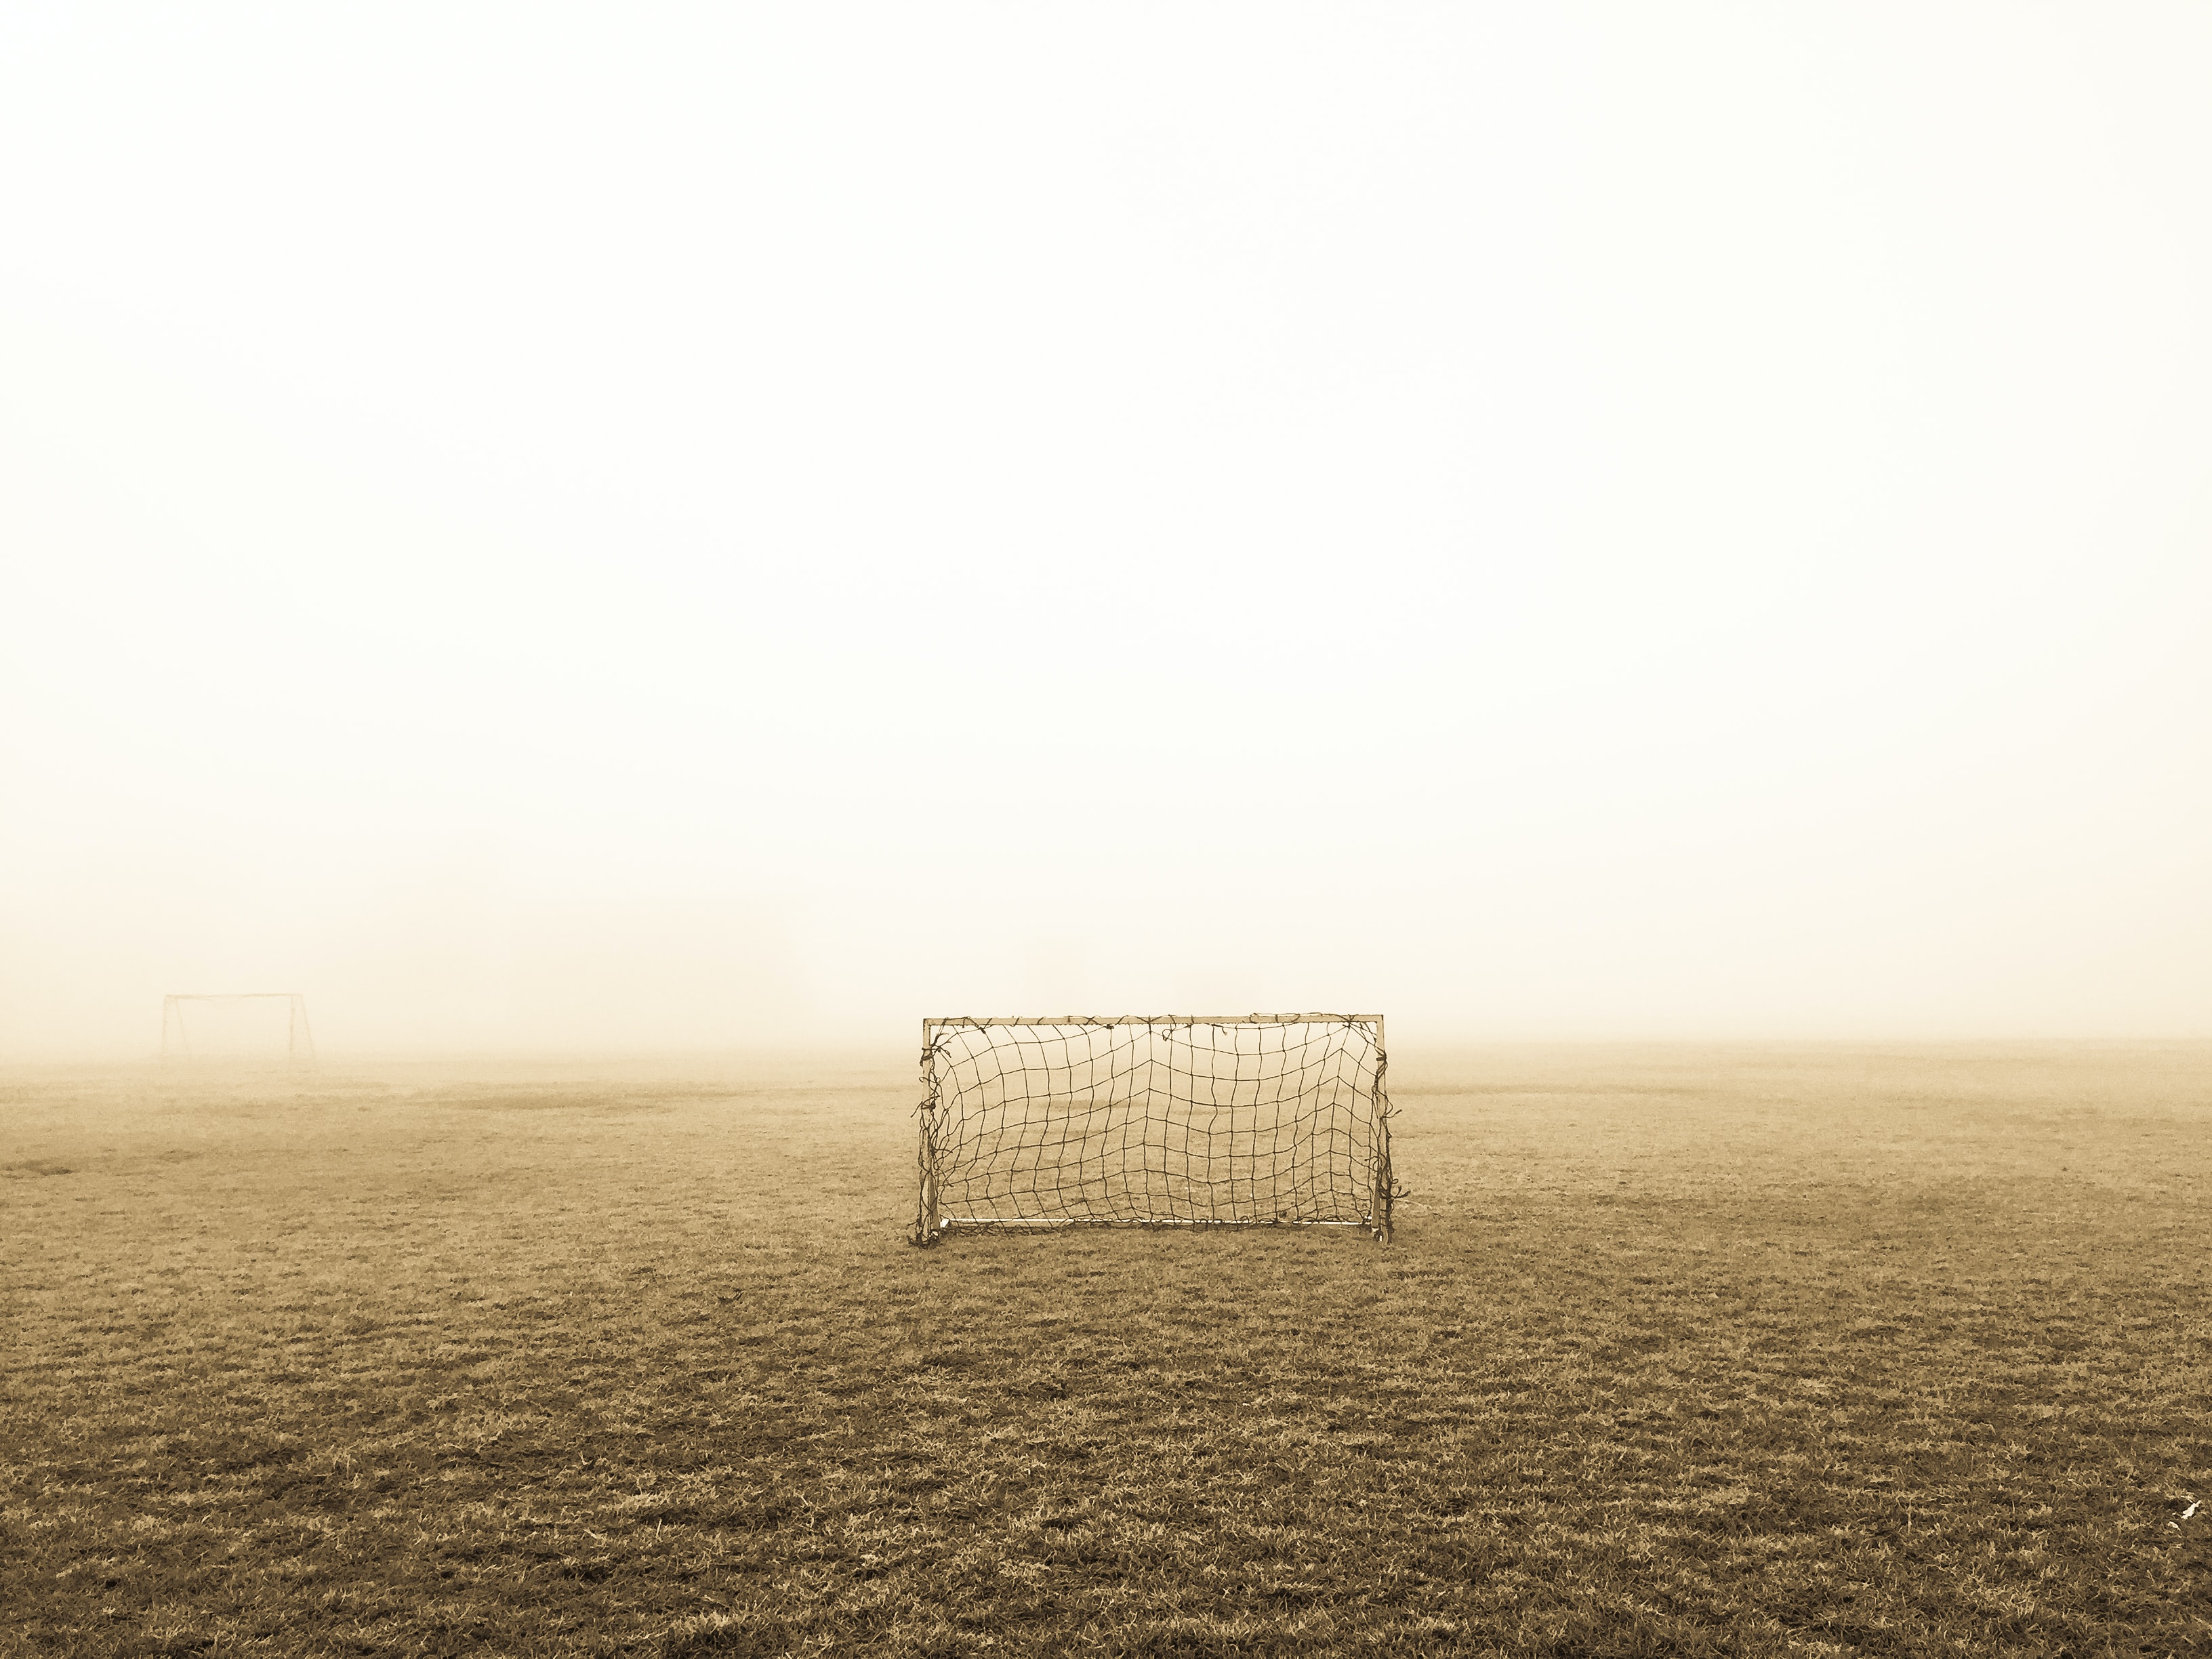 A dusty soccer pitch in South Africa